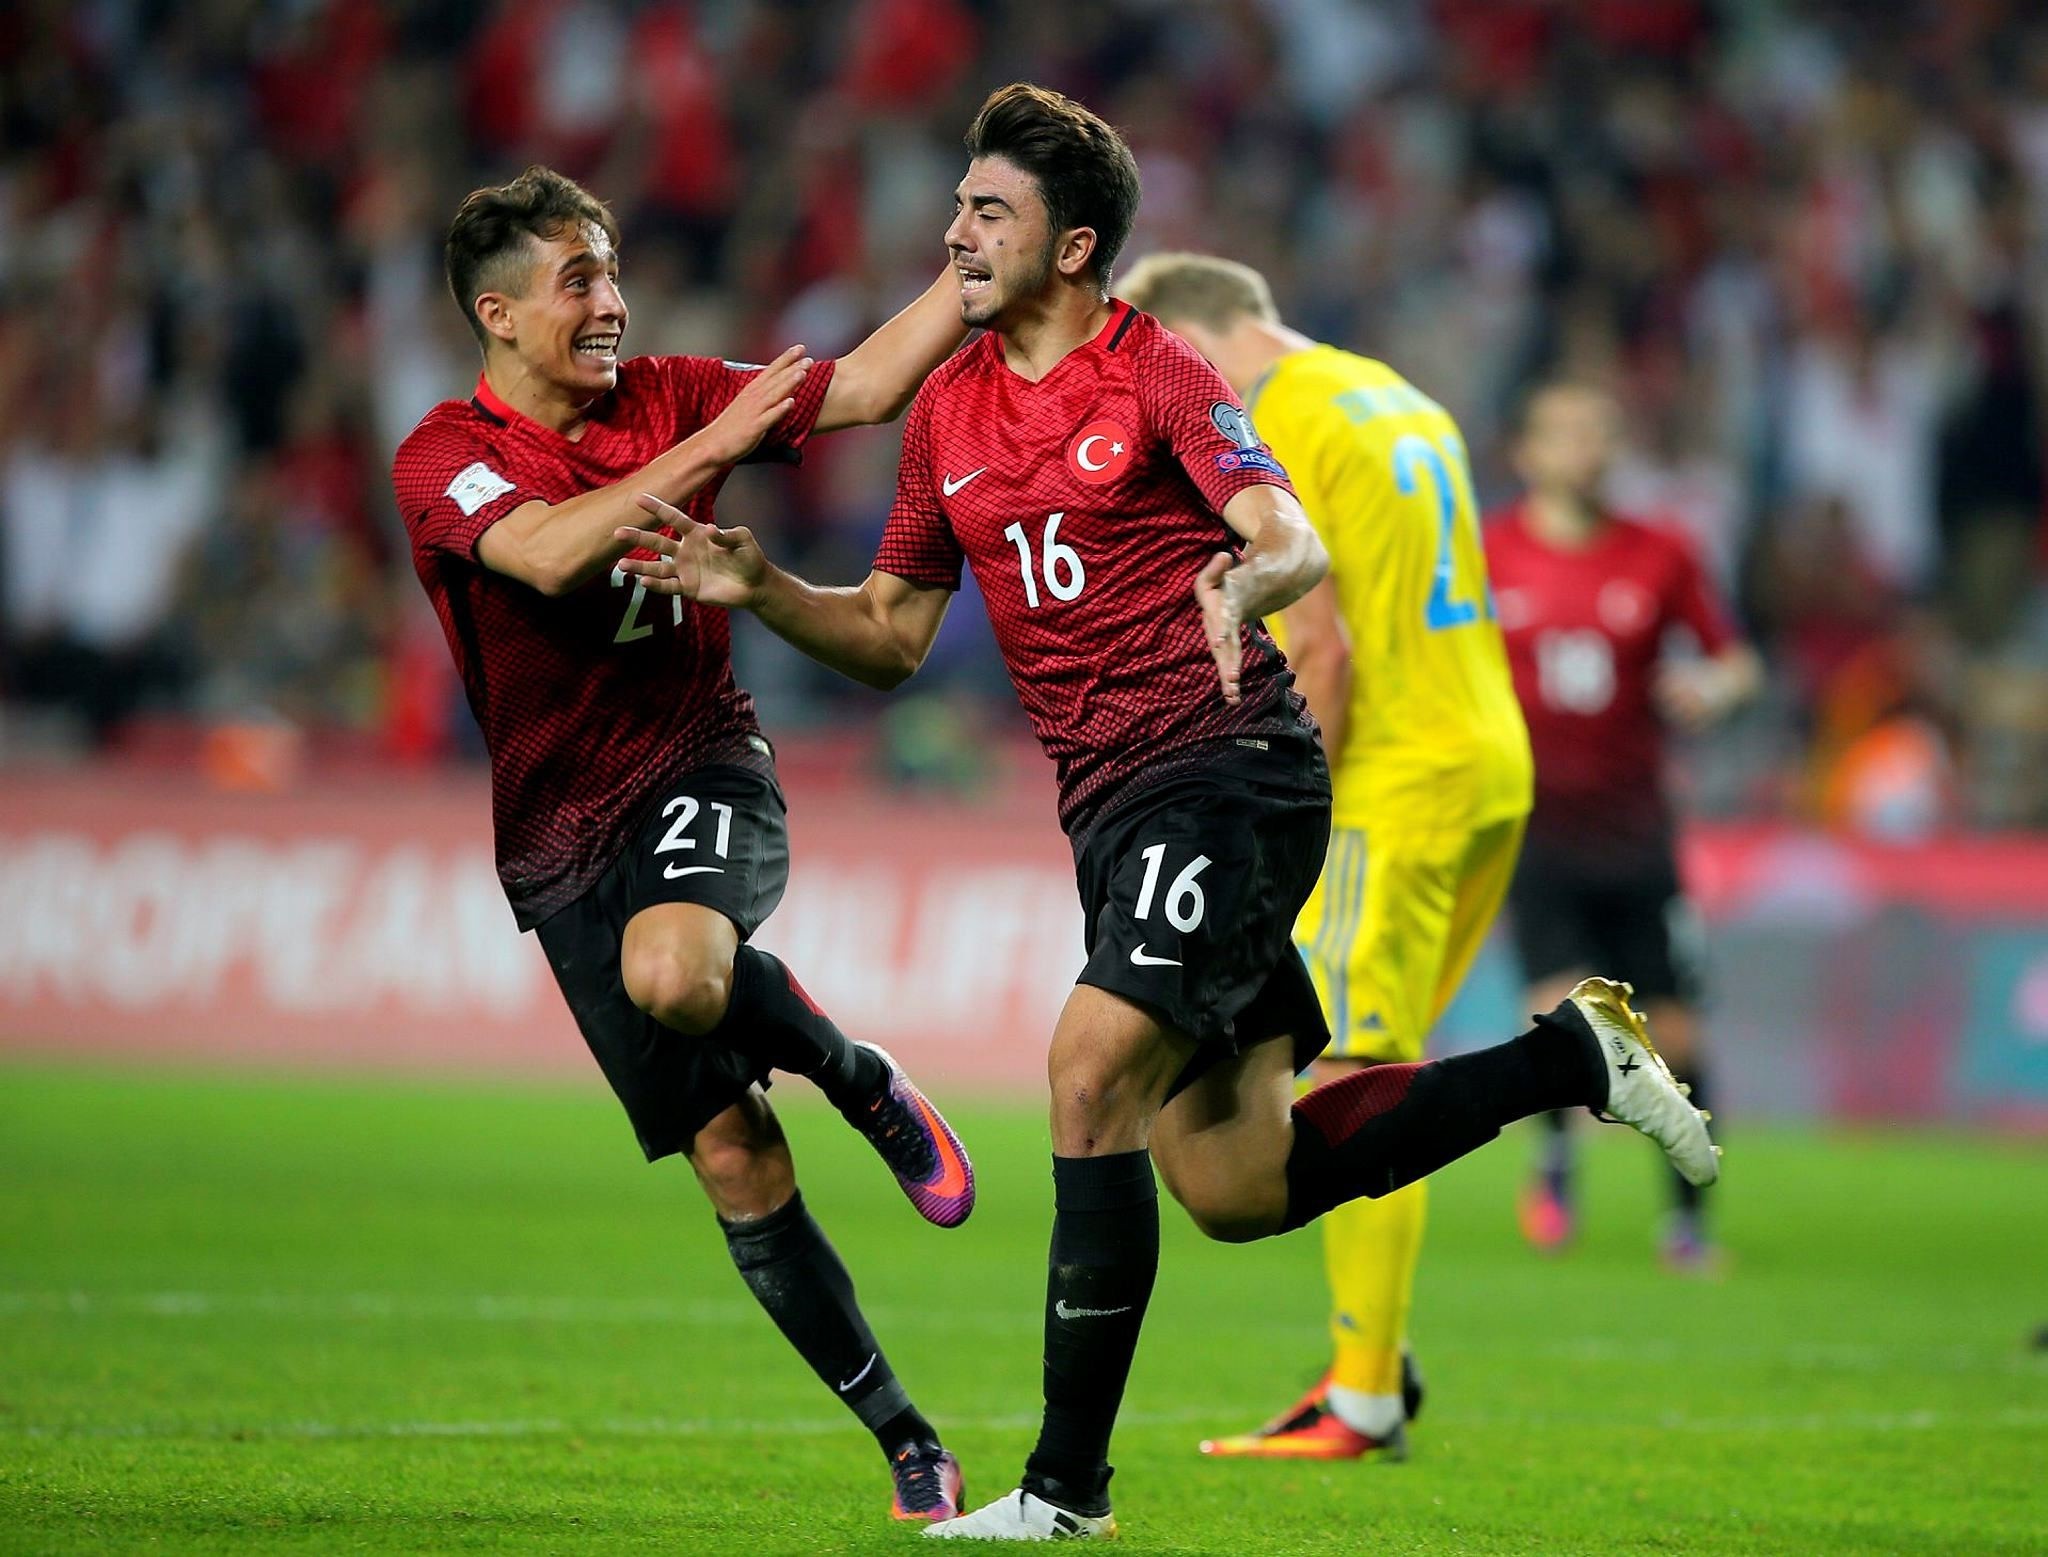 Turkey's Ozan Tufan, right, celebrates after scoring, as his teammate Emre Mor runs to join him, during the World Cup Group I qualifying match between Turkey and Ukraine. (AP Photo)